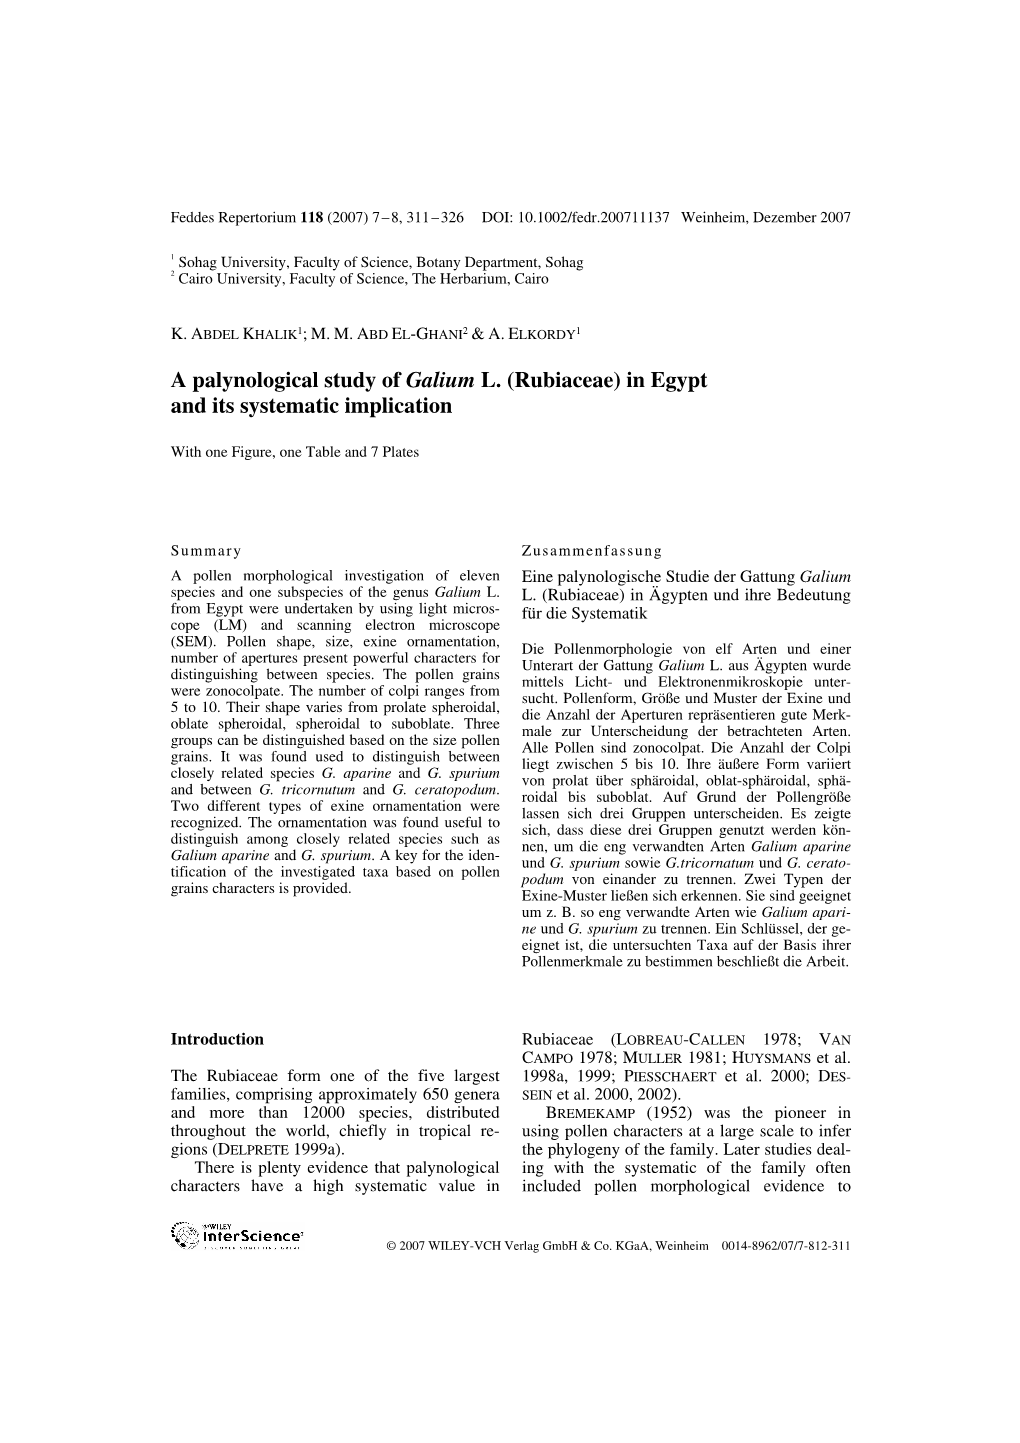 A Palynological Study of Galium L. (Rubiaceae) in Egypt and Its Systematic Implication